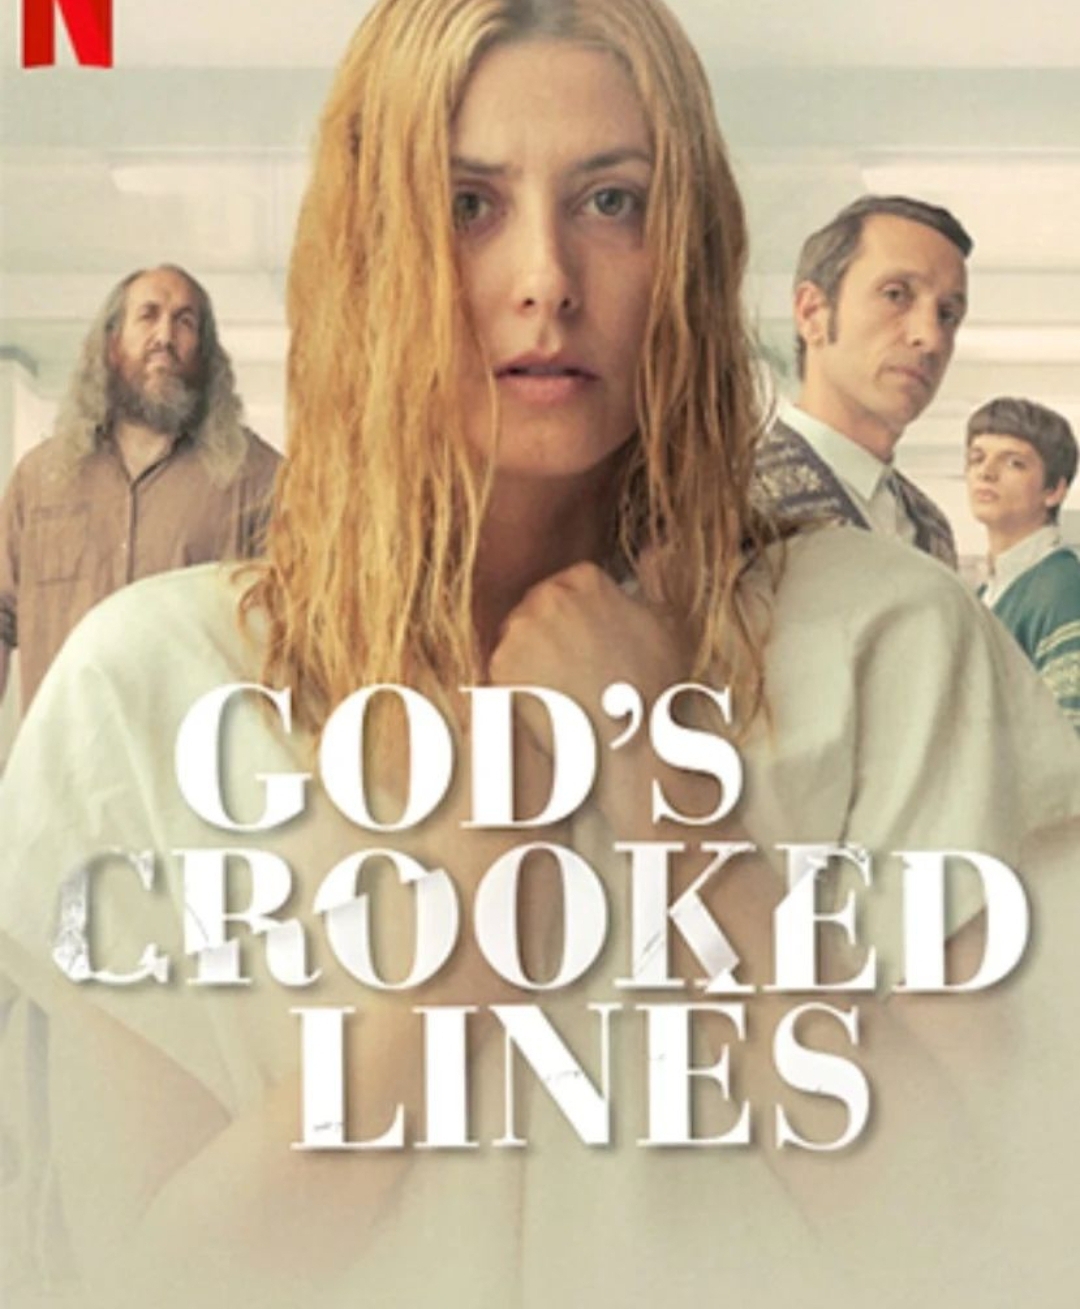 Movie review: God’s Crooked lines